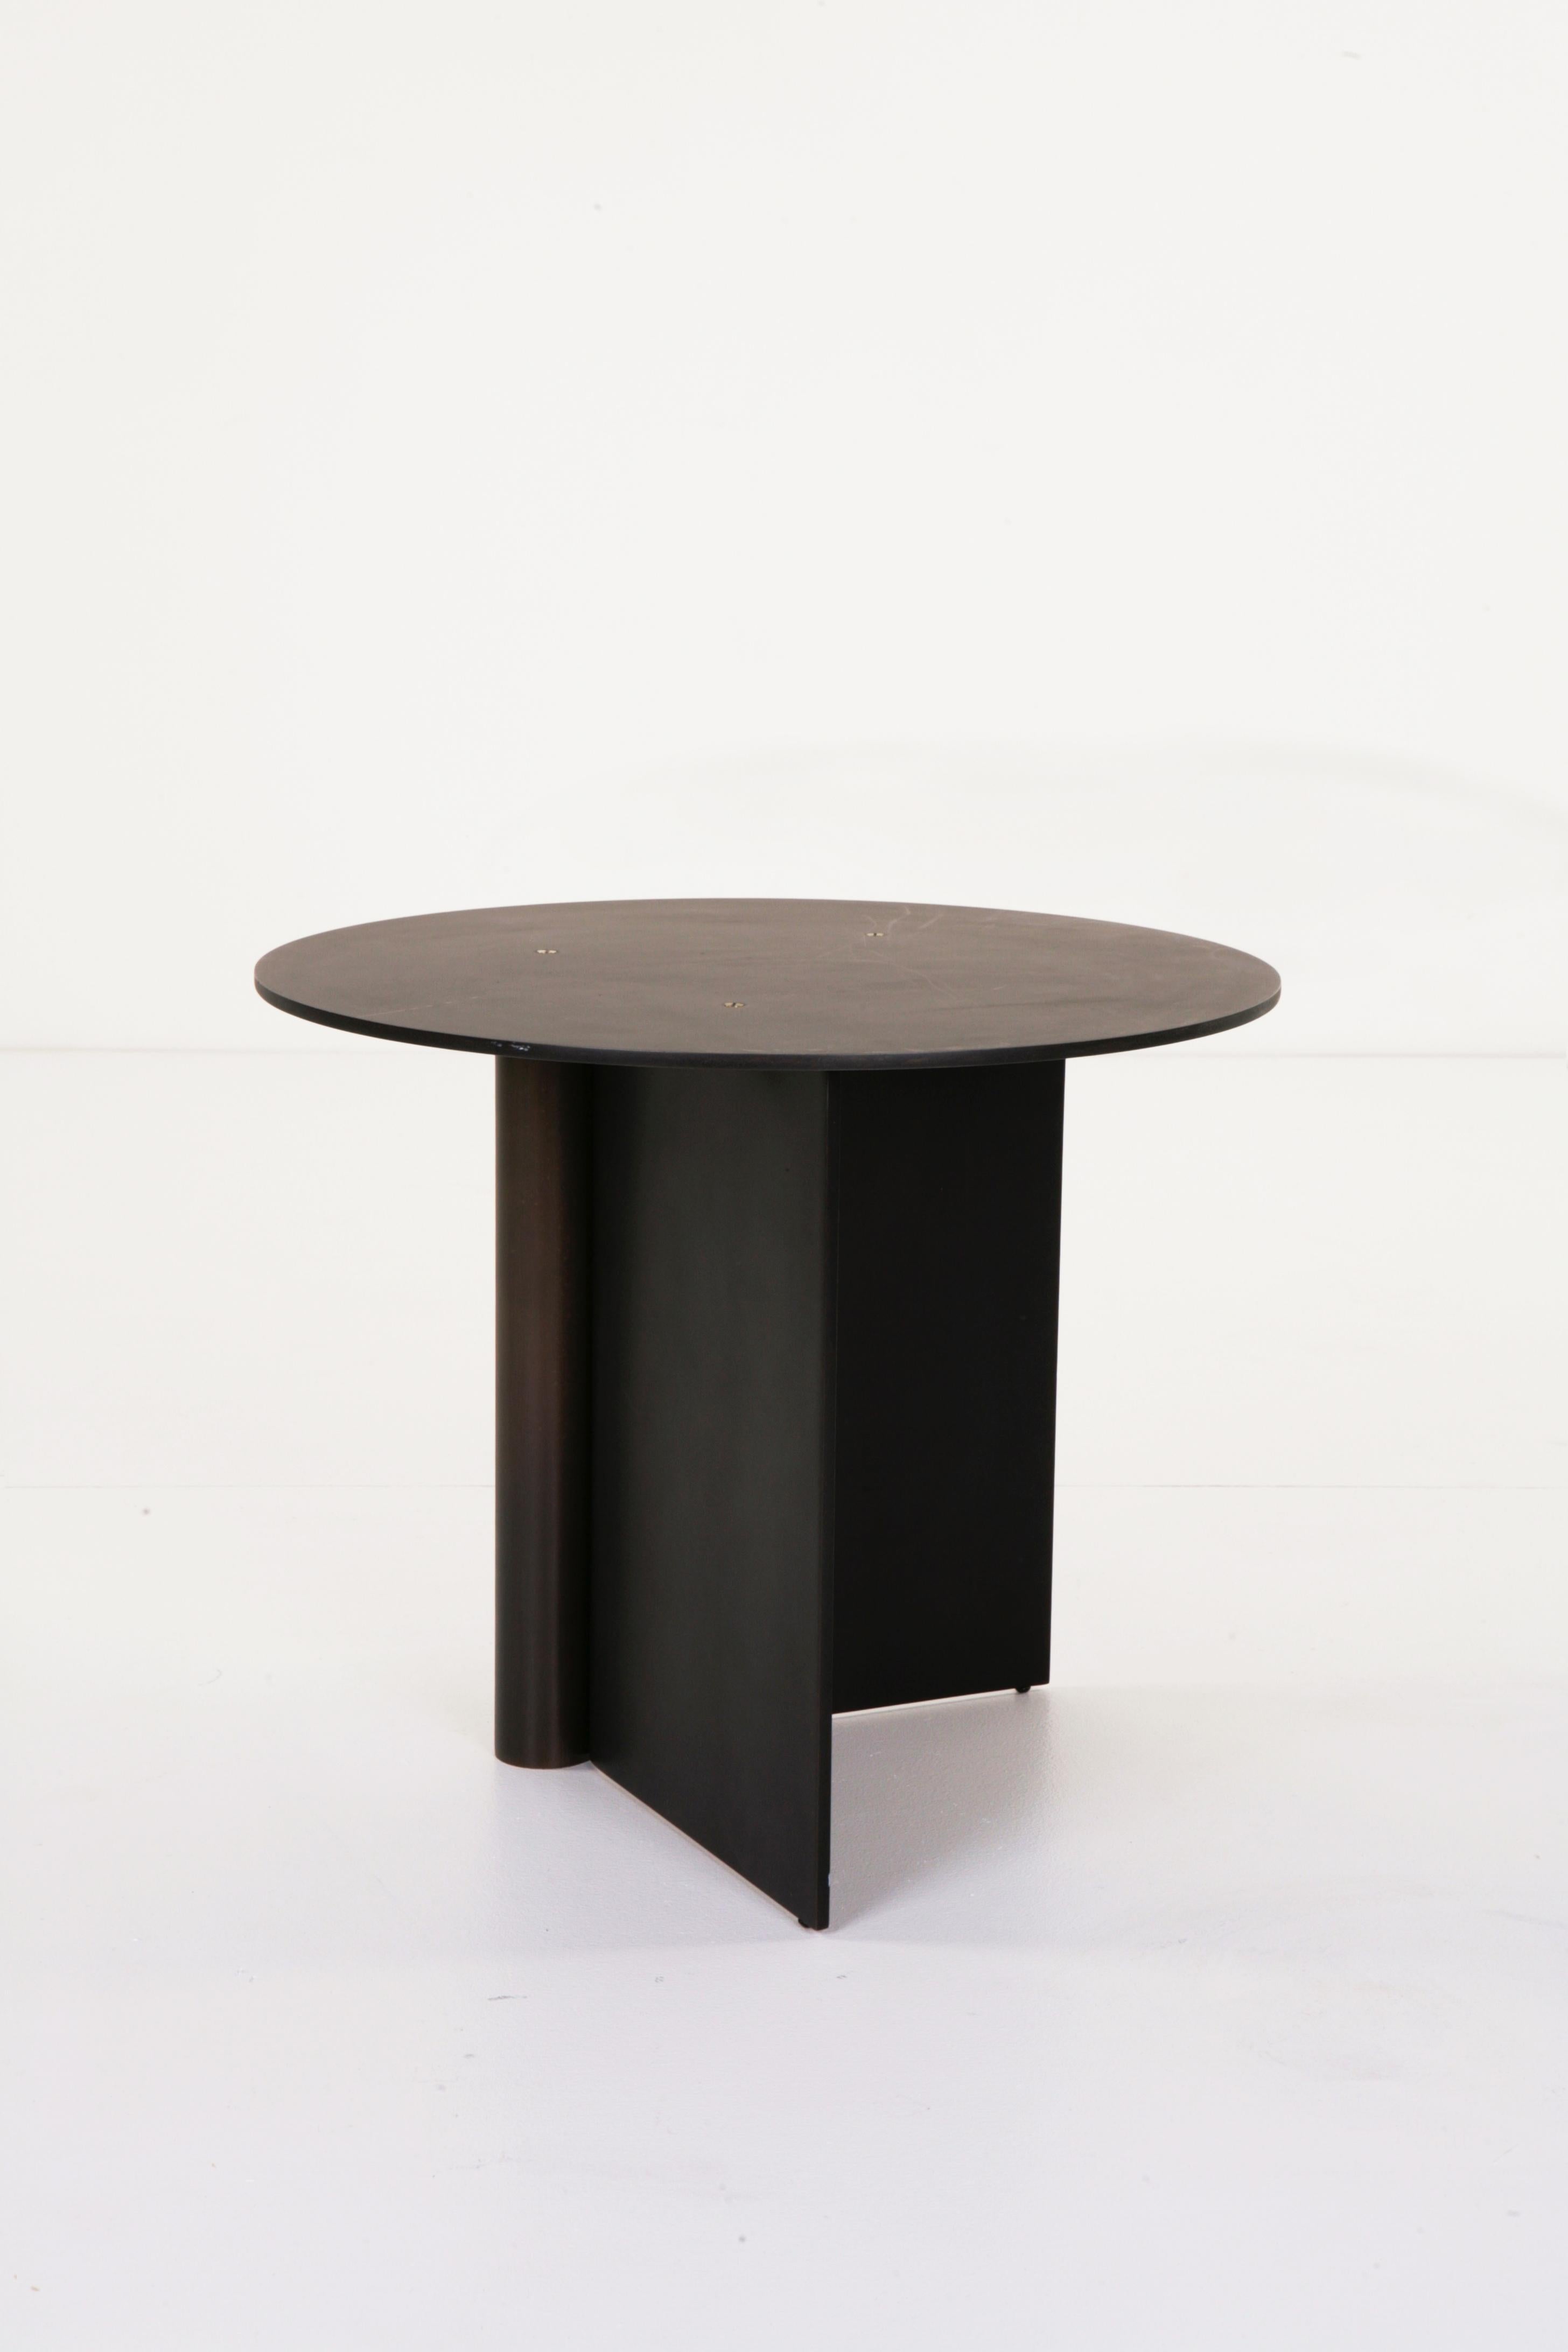 Plated Os Table Large I in Matte Aluminium, Blackened, and Satin Brass